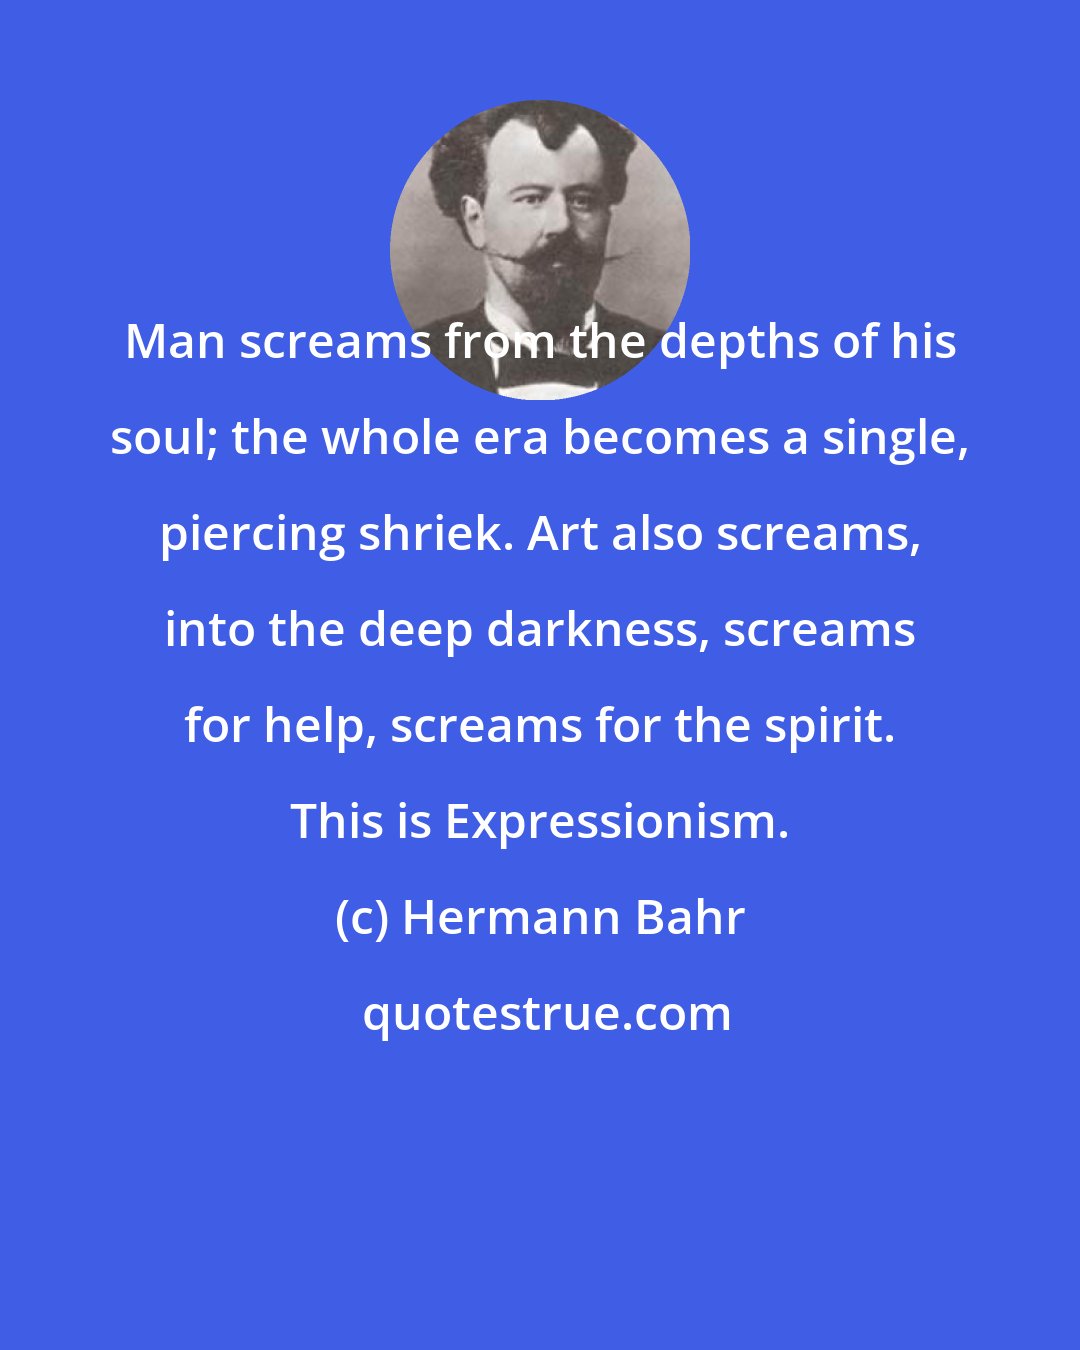 Hermann Bahr: Man screams from the depths of his soul; the whole era becomes a single, piercing shriek. Art also screams, into the deep darkness, screams for help, screams for the spirit. This is Expressionism.